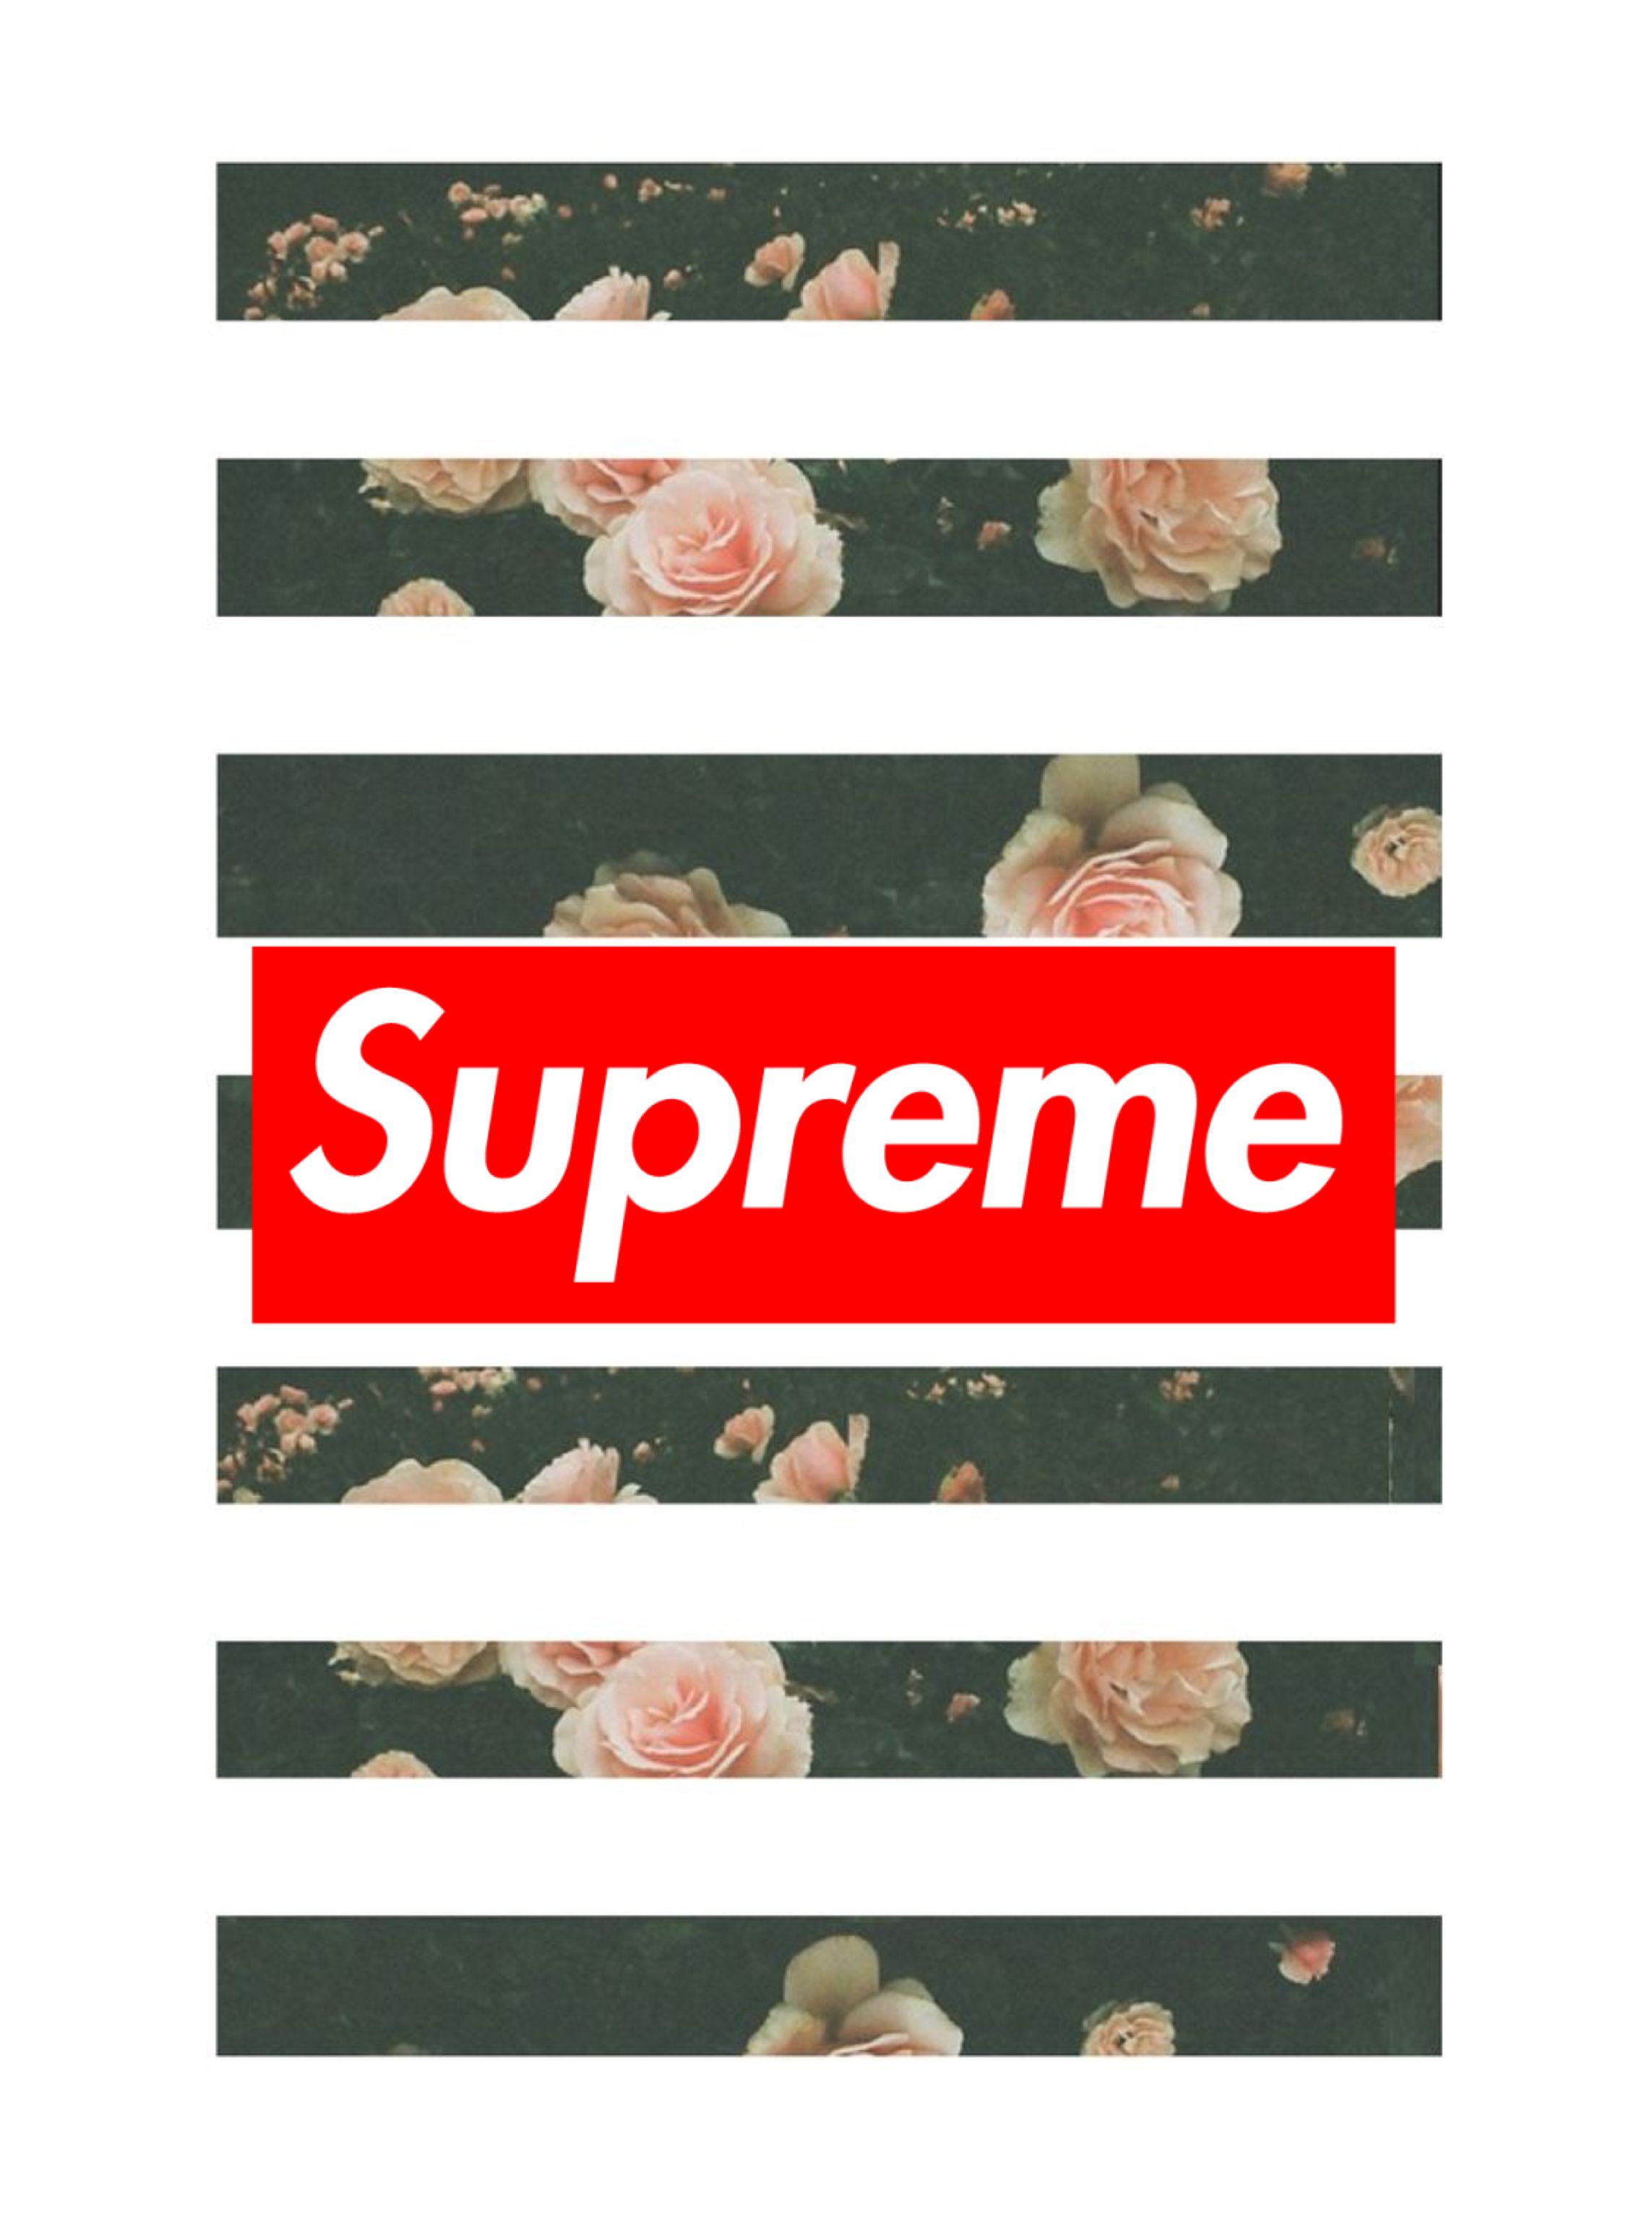 Aesthetic supreme wallpaper for phone backgrounds. - Supreme